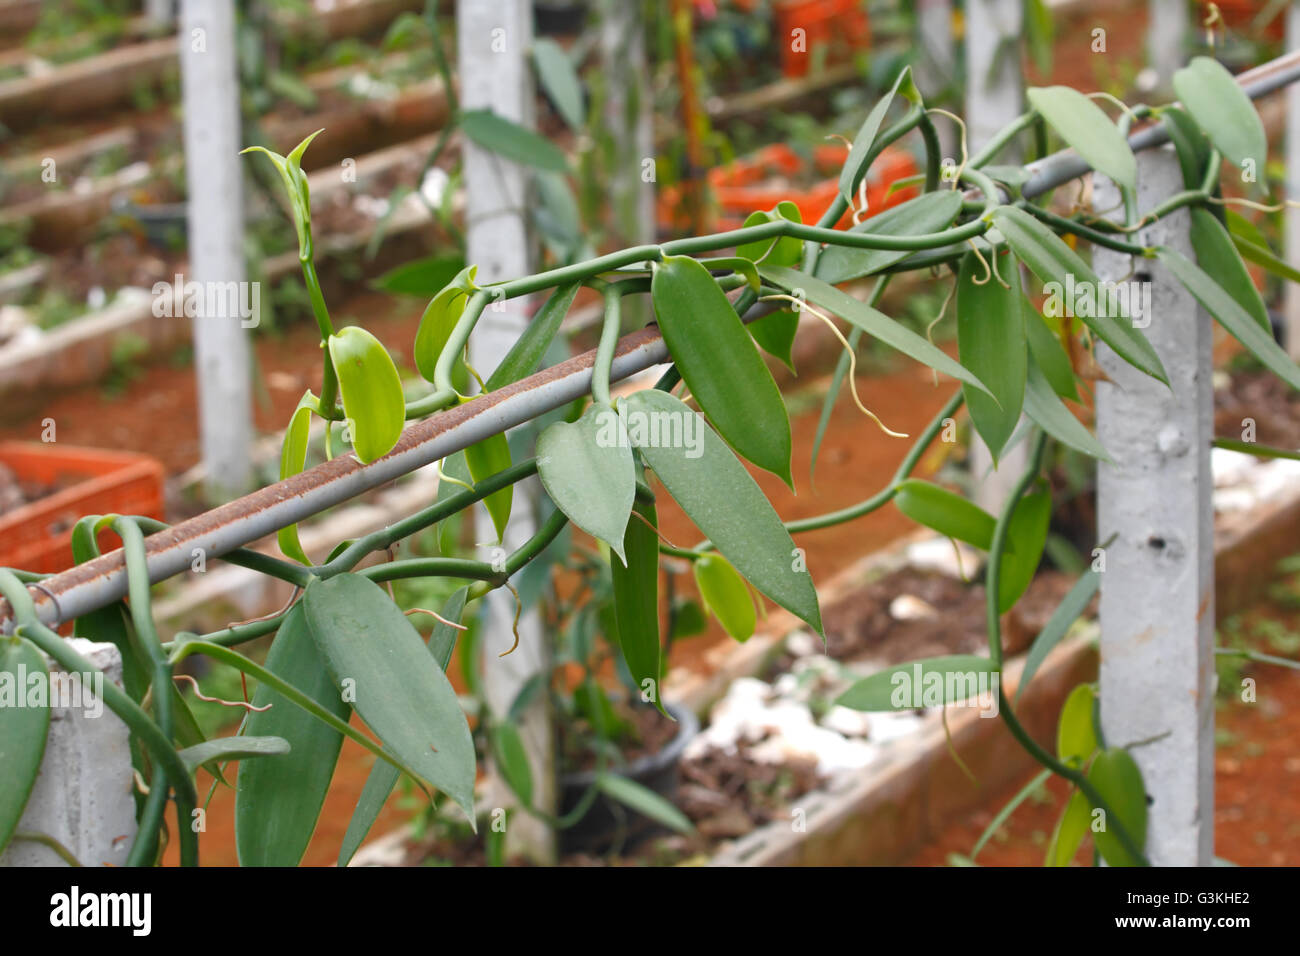 Vanilla cultivation farm, Vanilla planifolia (orchid) planting for harvest the fruits to extract vanilla flavoring. Stock Photo